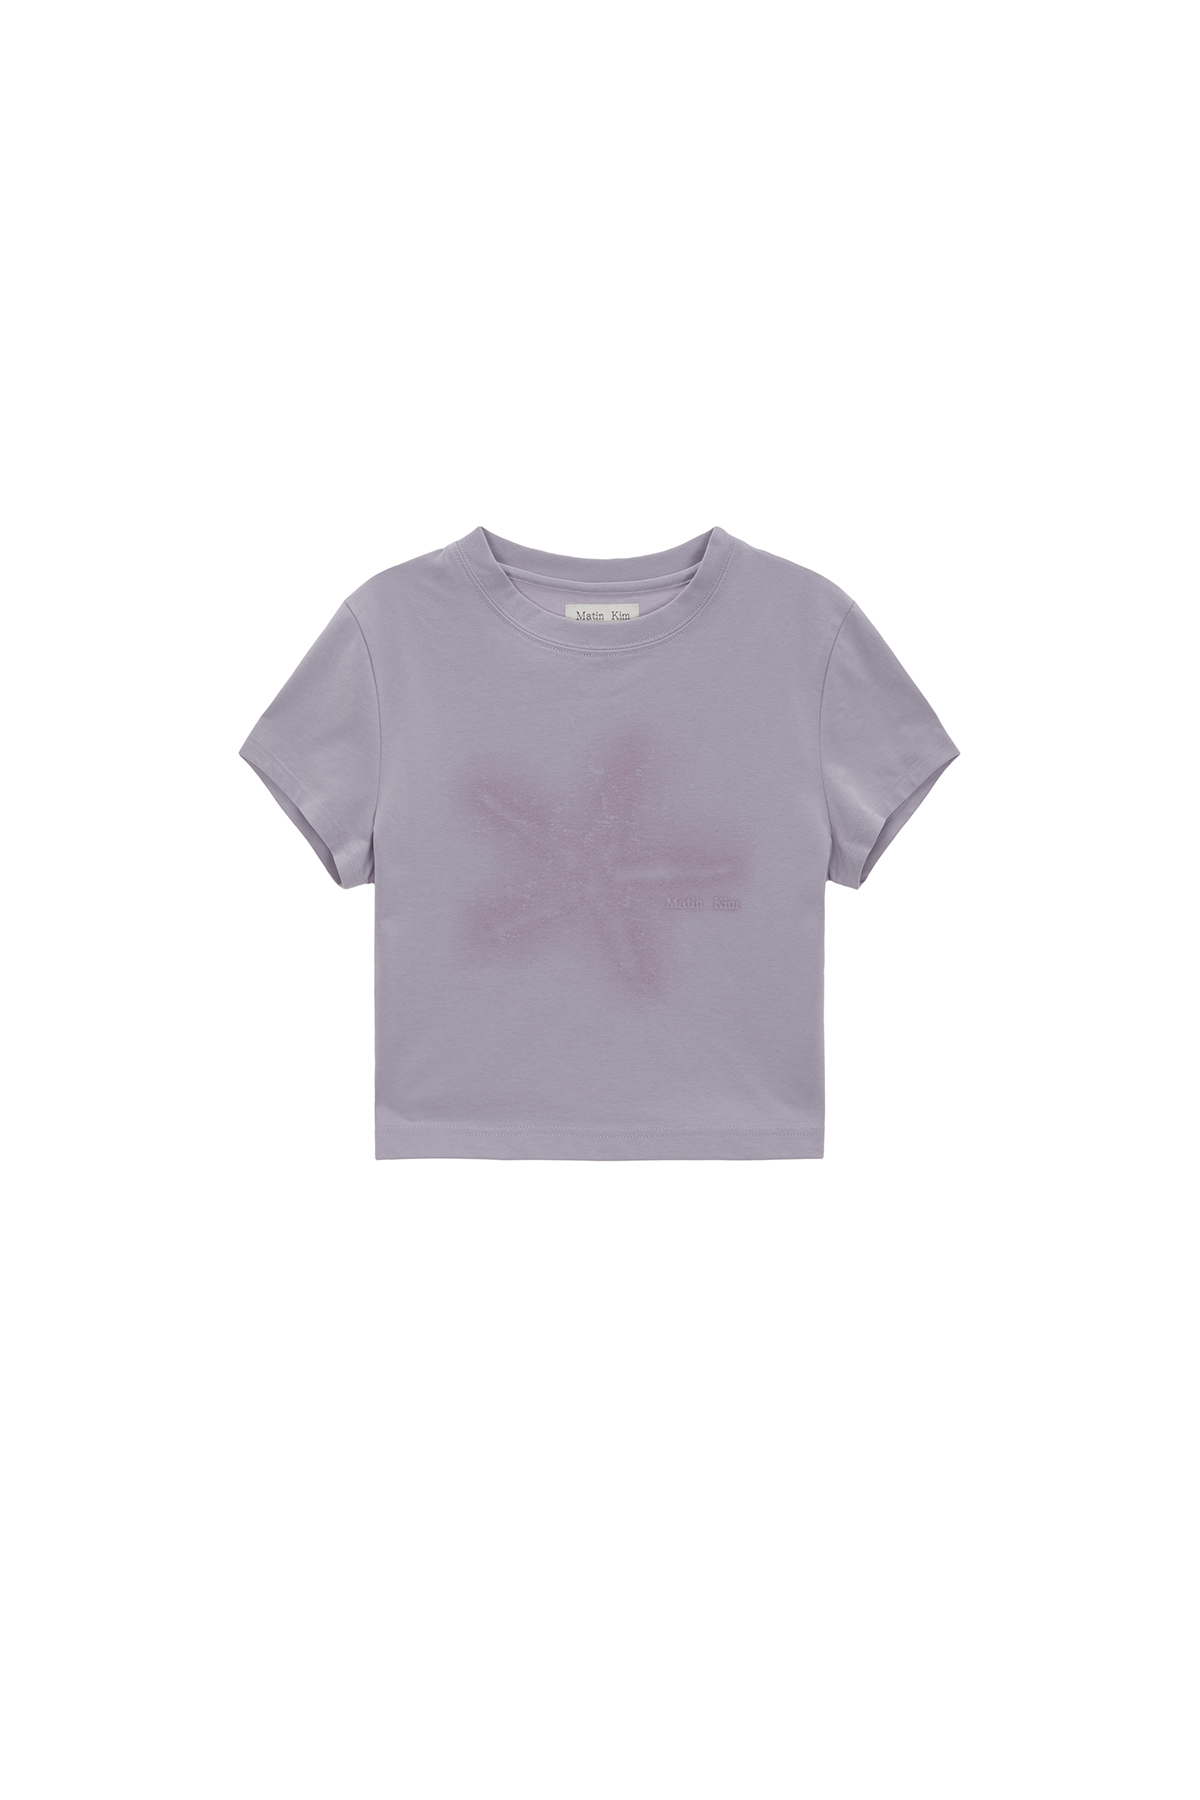 STARFISH GRAPHIC CROP TOP IN LILAC